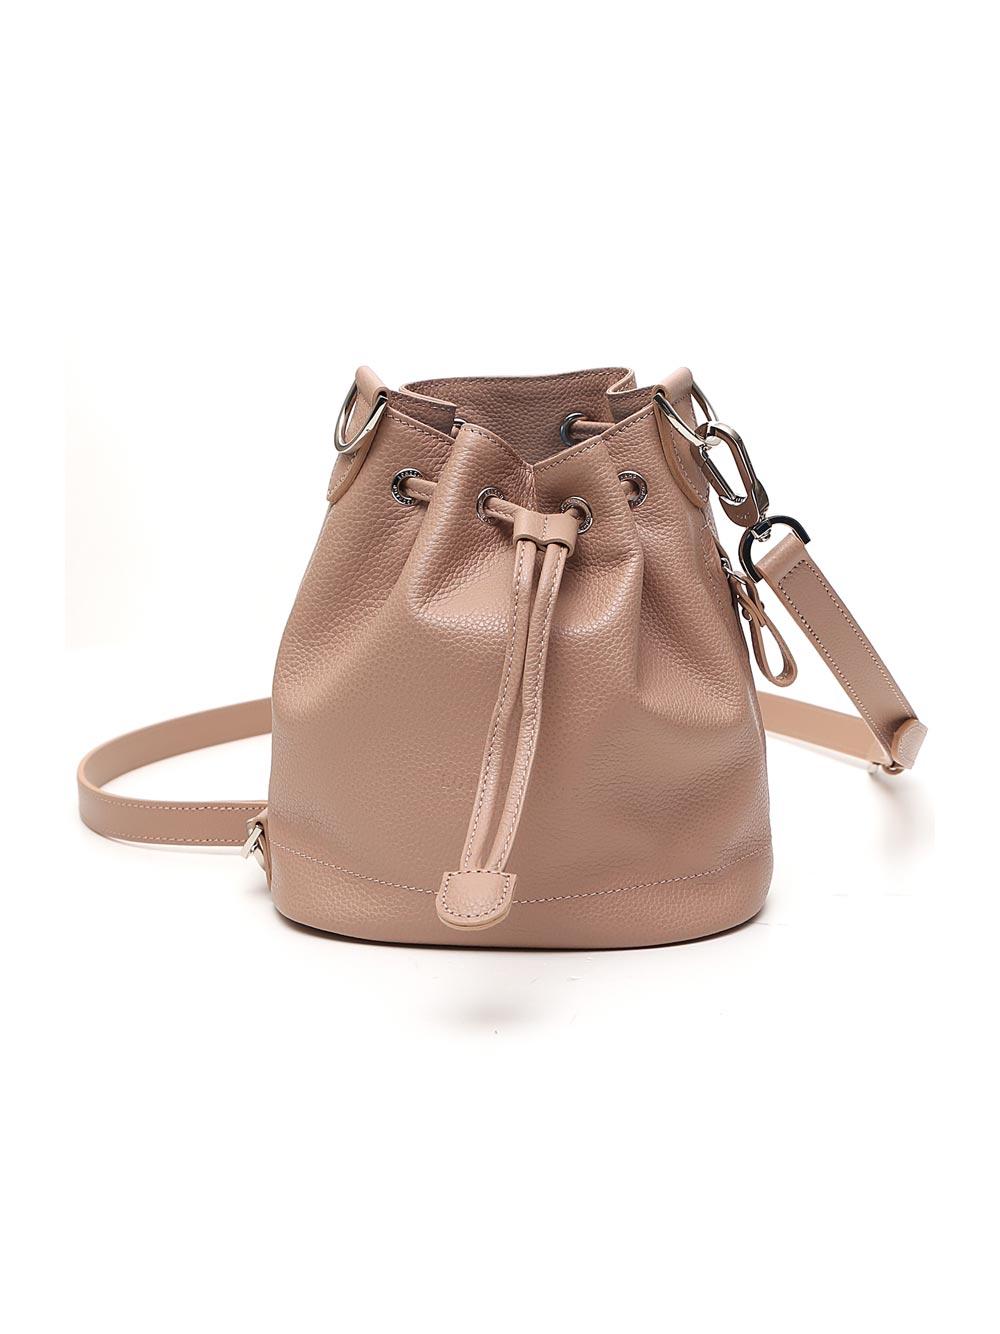 Longchamp Leather Le Foulonné Small Bucket Bag in Beige (Natural) | Lyst